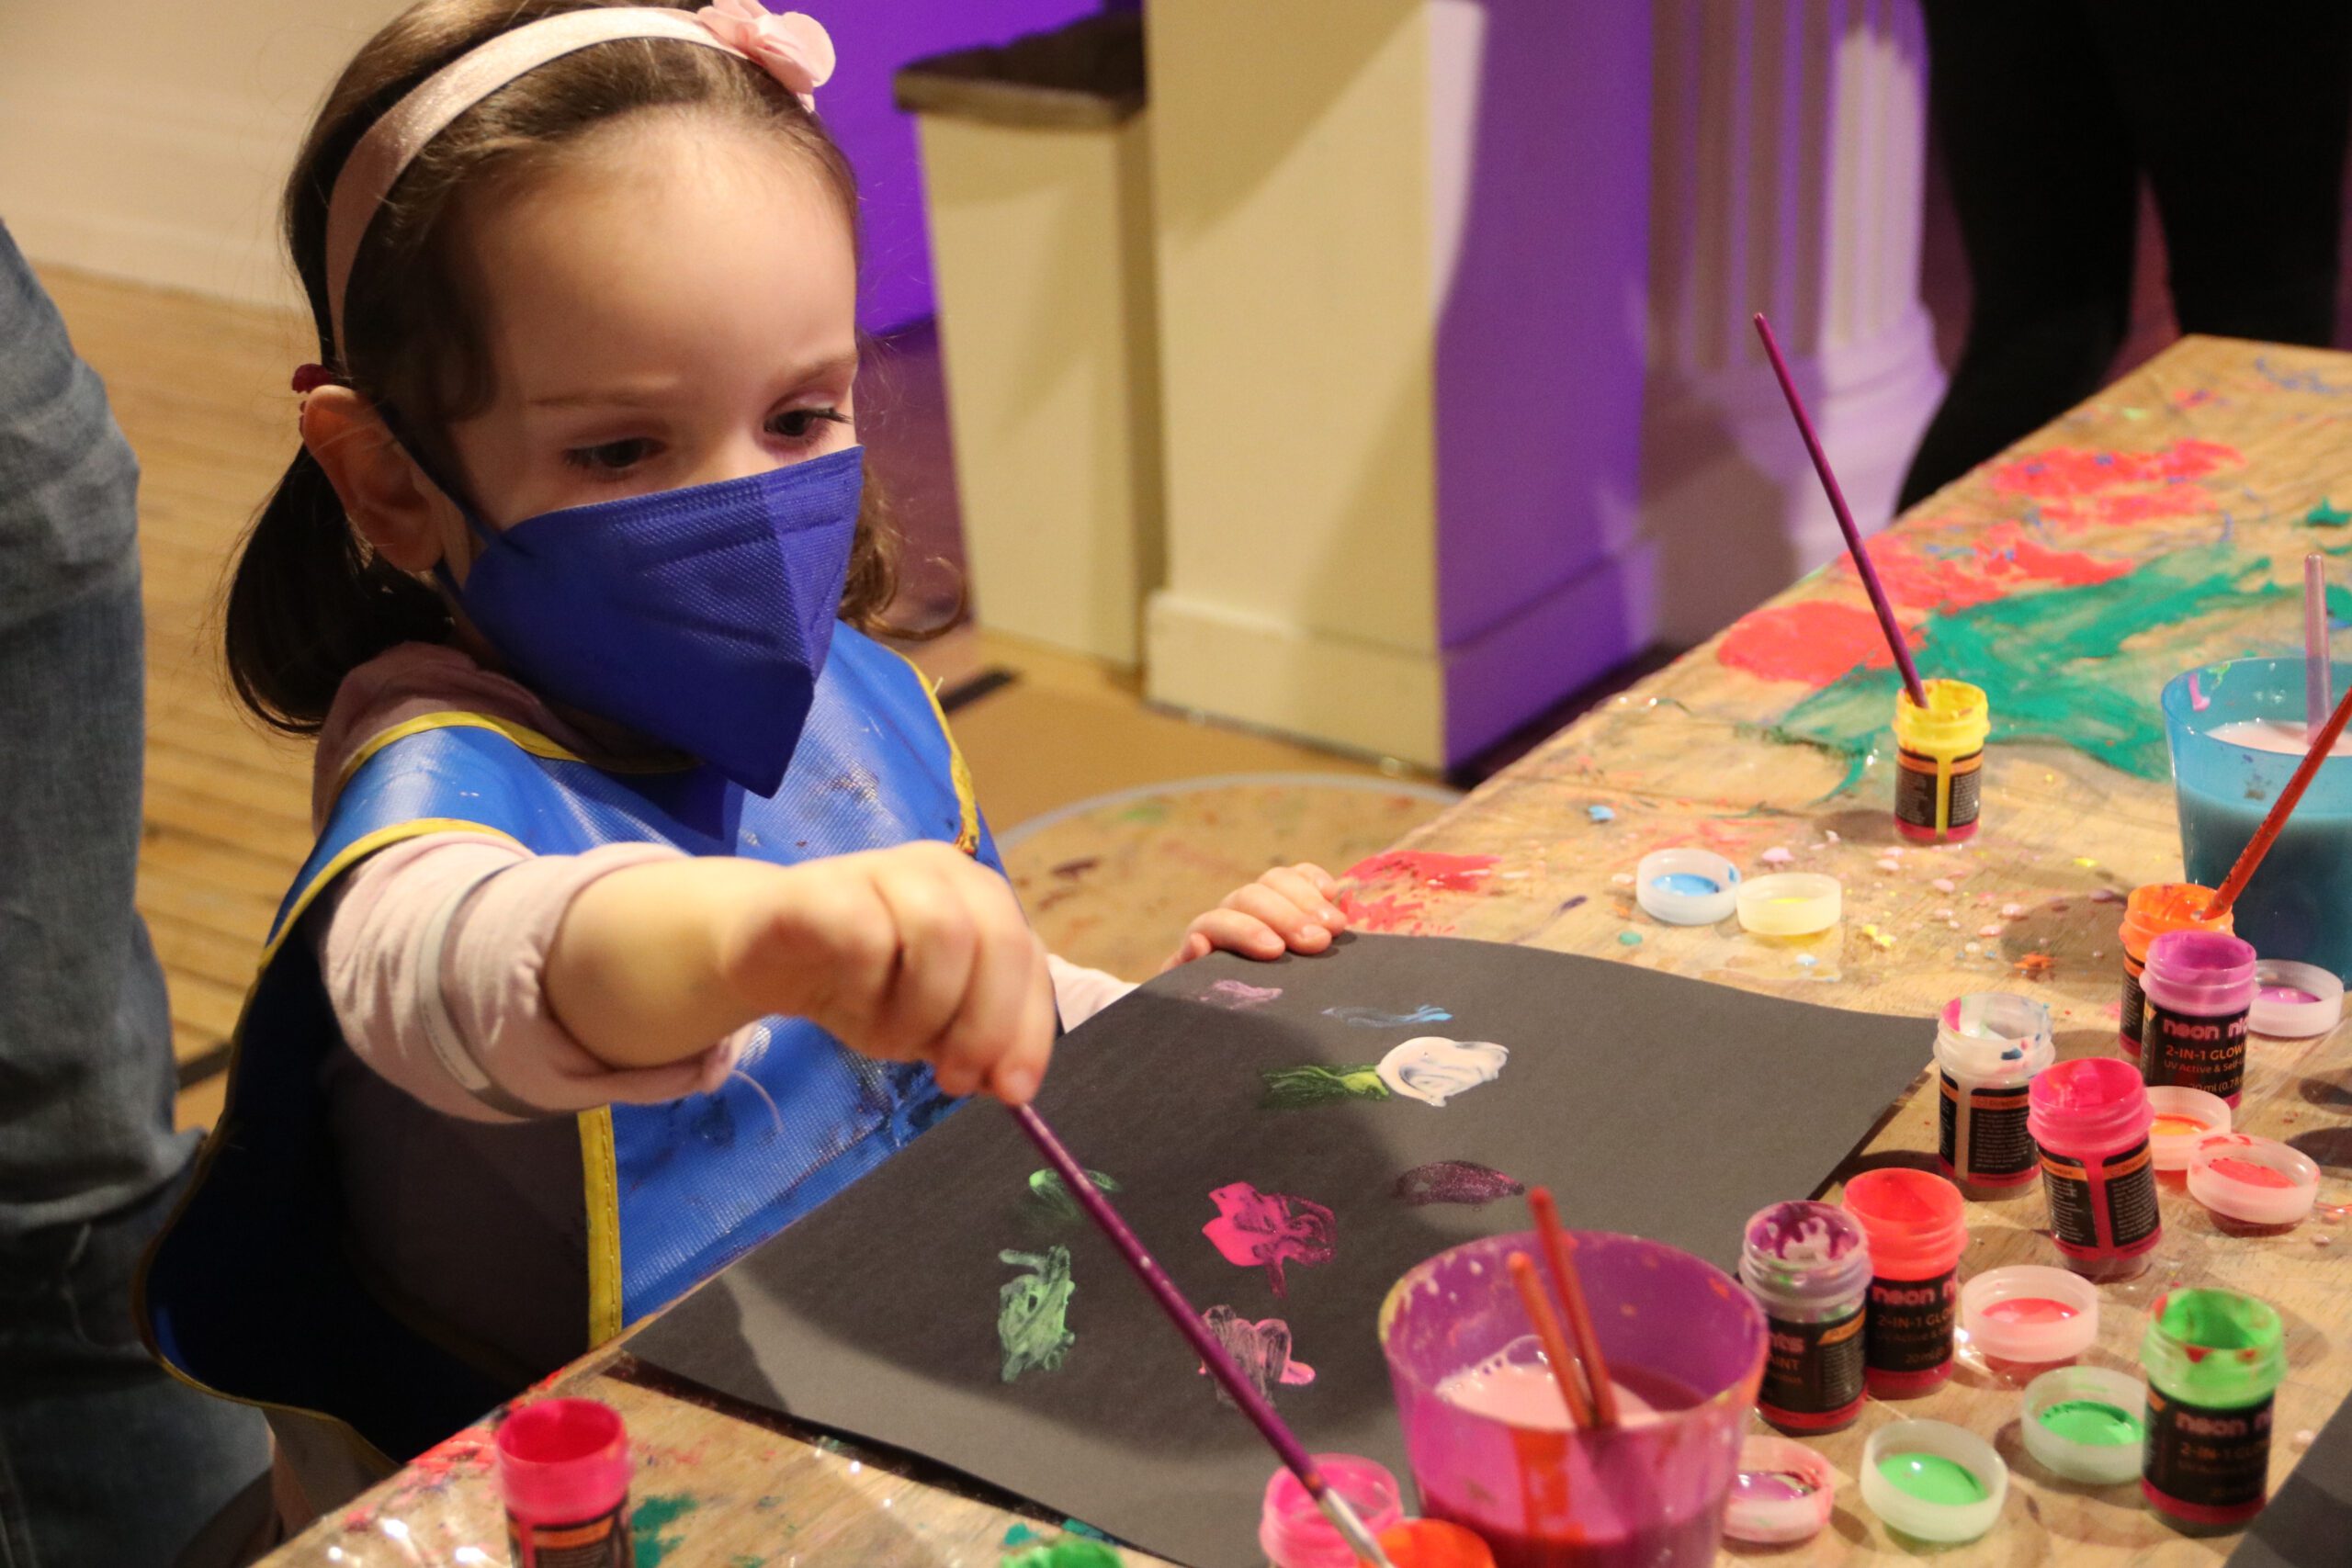 A child uses neon colored paints to paint on a black canvas